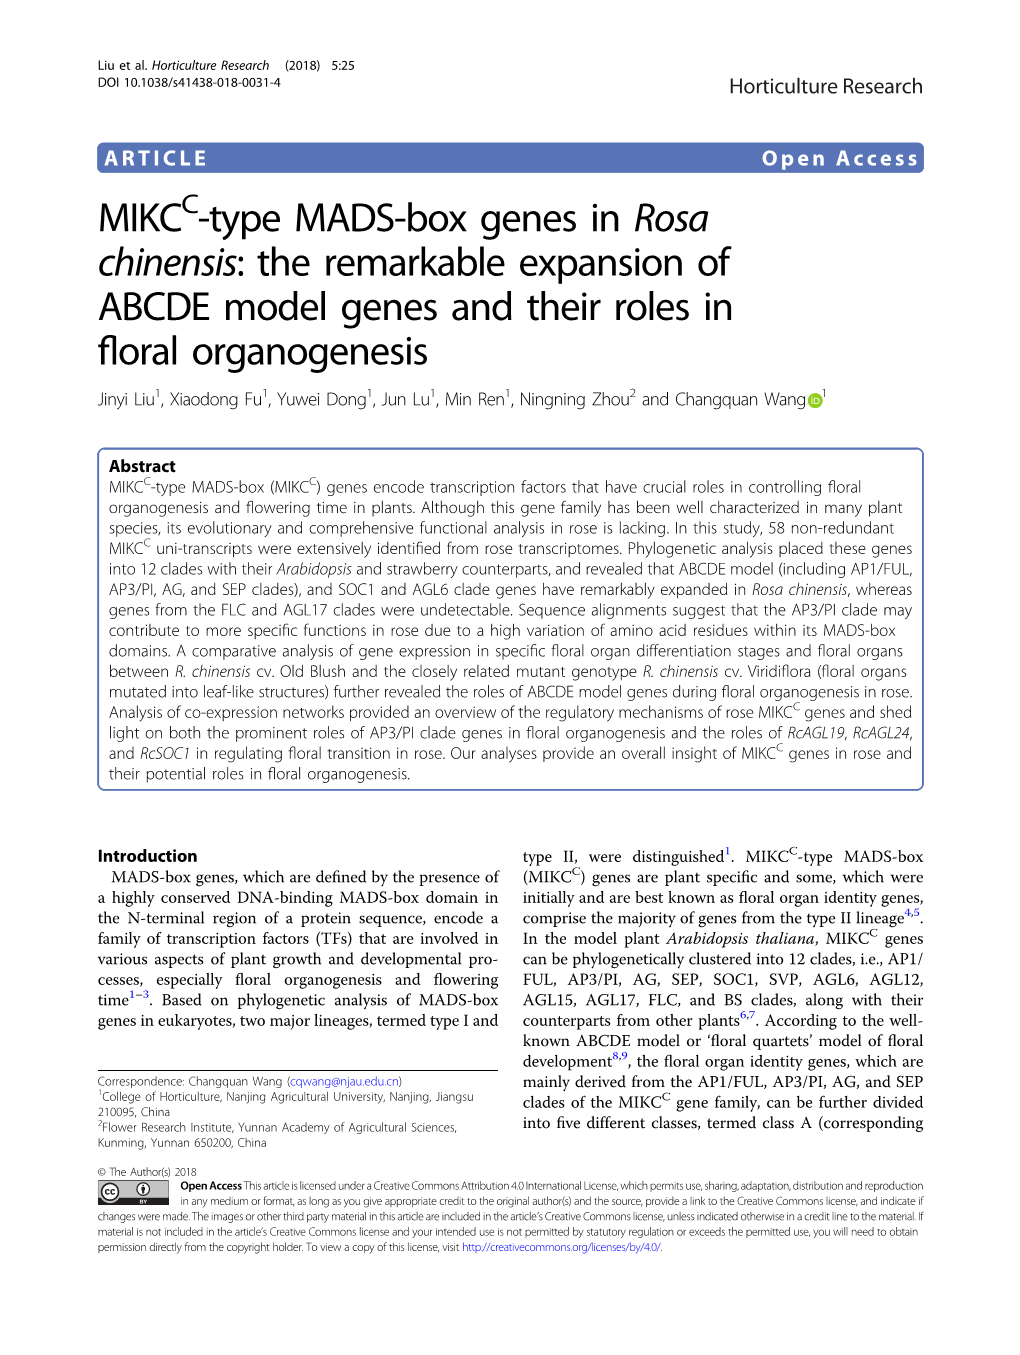 MIKCC-Type MADS-Box Genes in Rosa Chinensis